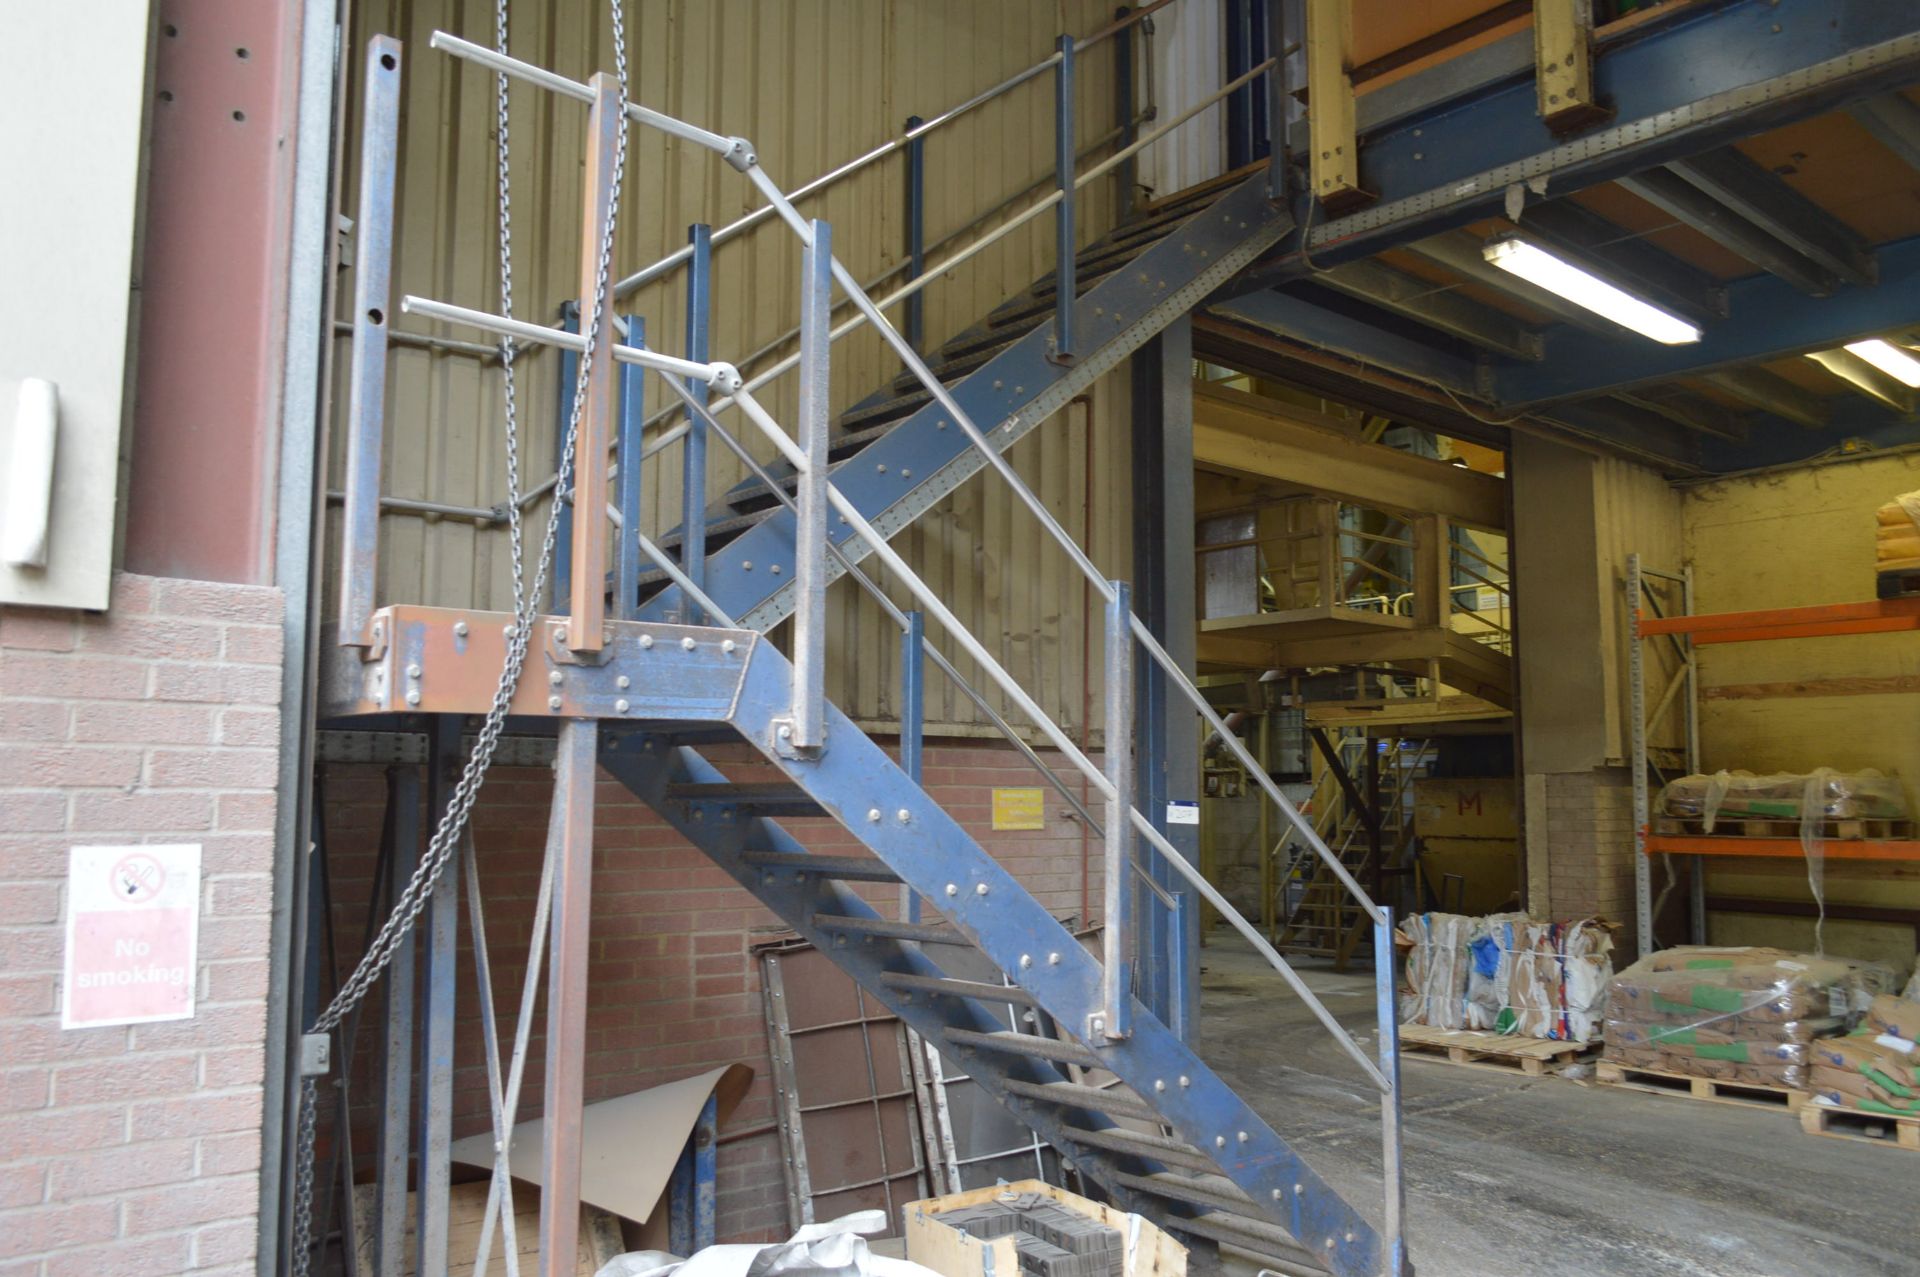 BOLTED SECTIONAL STEEL FRAMED MEZZANINE FLOOR, approx. 18.5m x 6.9m x 4.4m high (to floor), with - Image 2 of 5